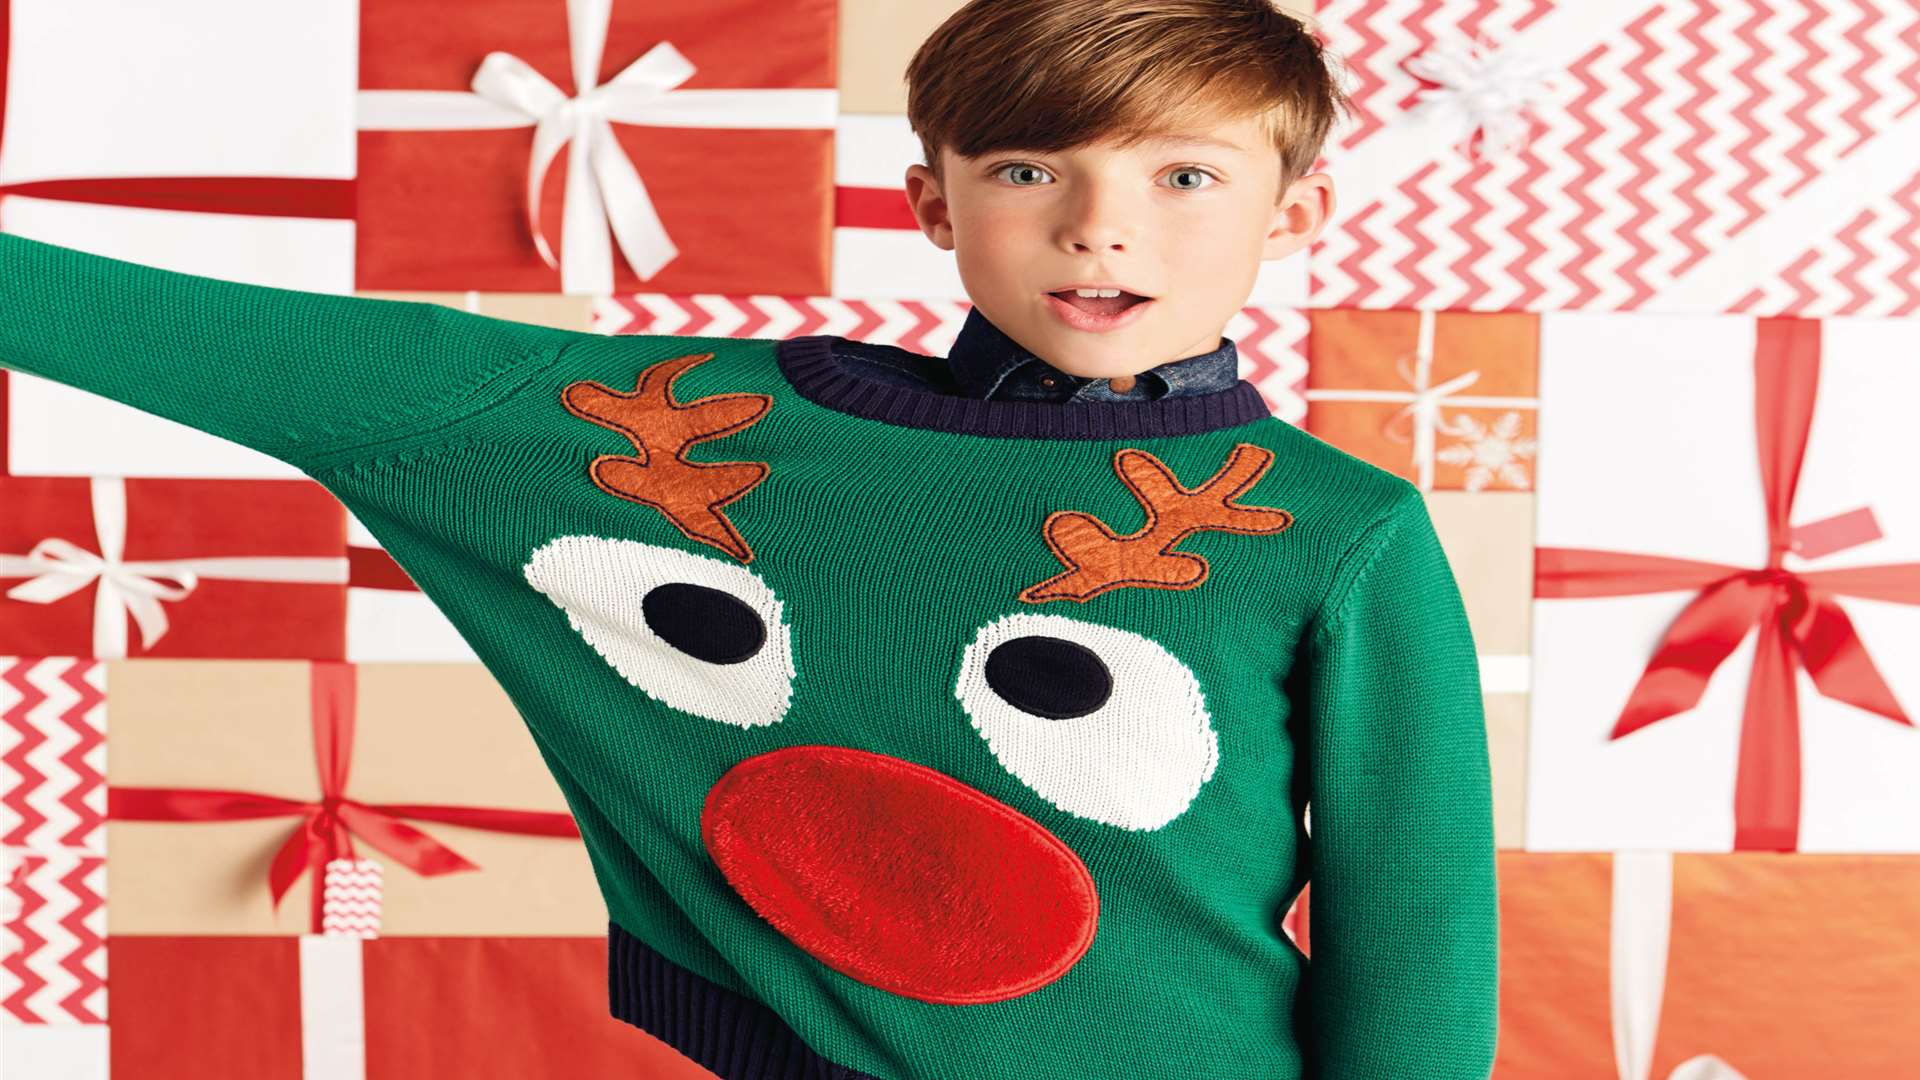 Kids will love this Rudolf jumper from Next. It costs £15 and is available in various sizes.